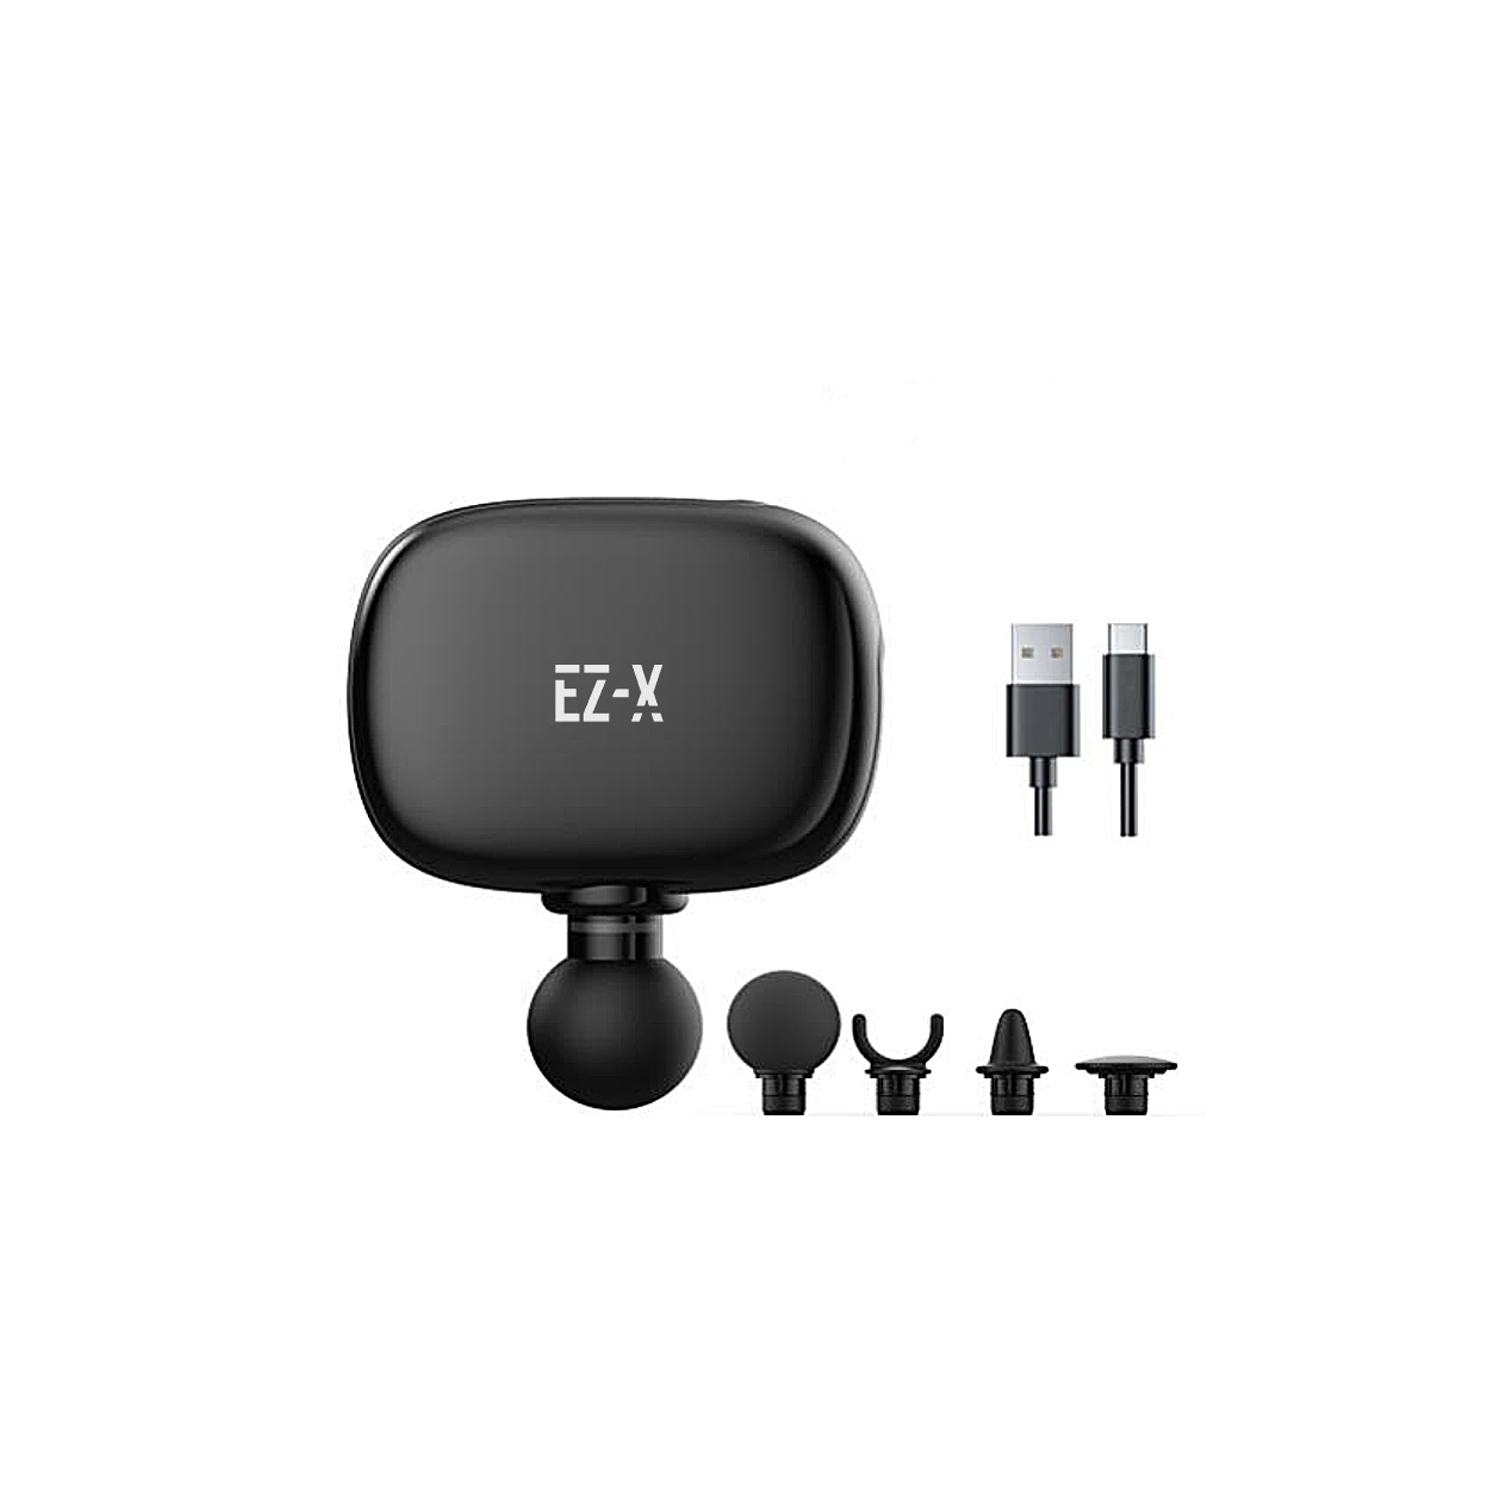 EZ-X Compact - Premium Percussion Mini Massage Gun - Compact & Powerful Portable Massager - Extra Quiet - Extra Power - Lightweight - Long Lasting battery - [with Carrying Case]